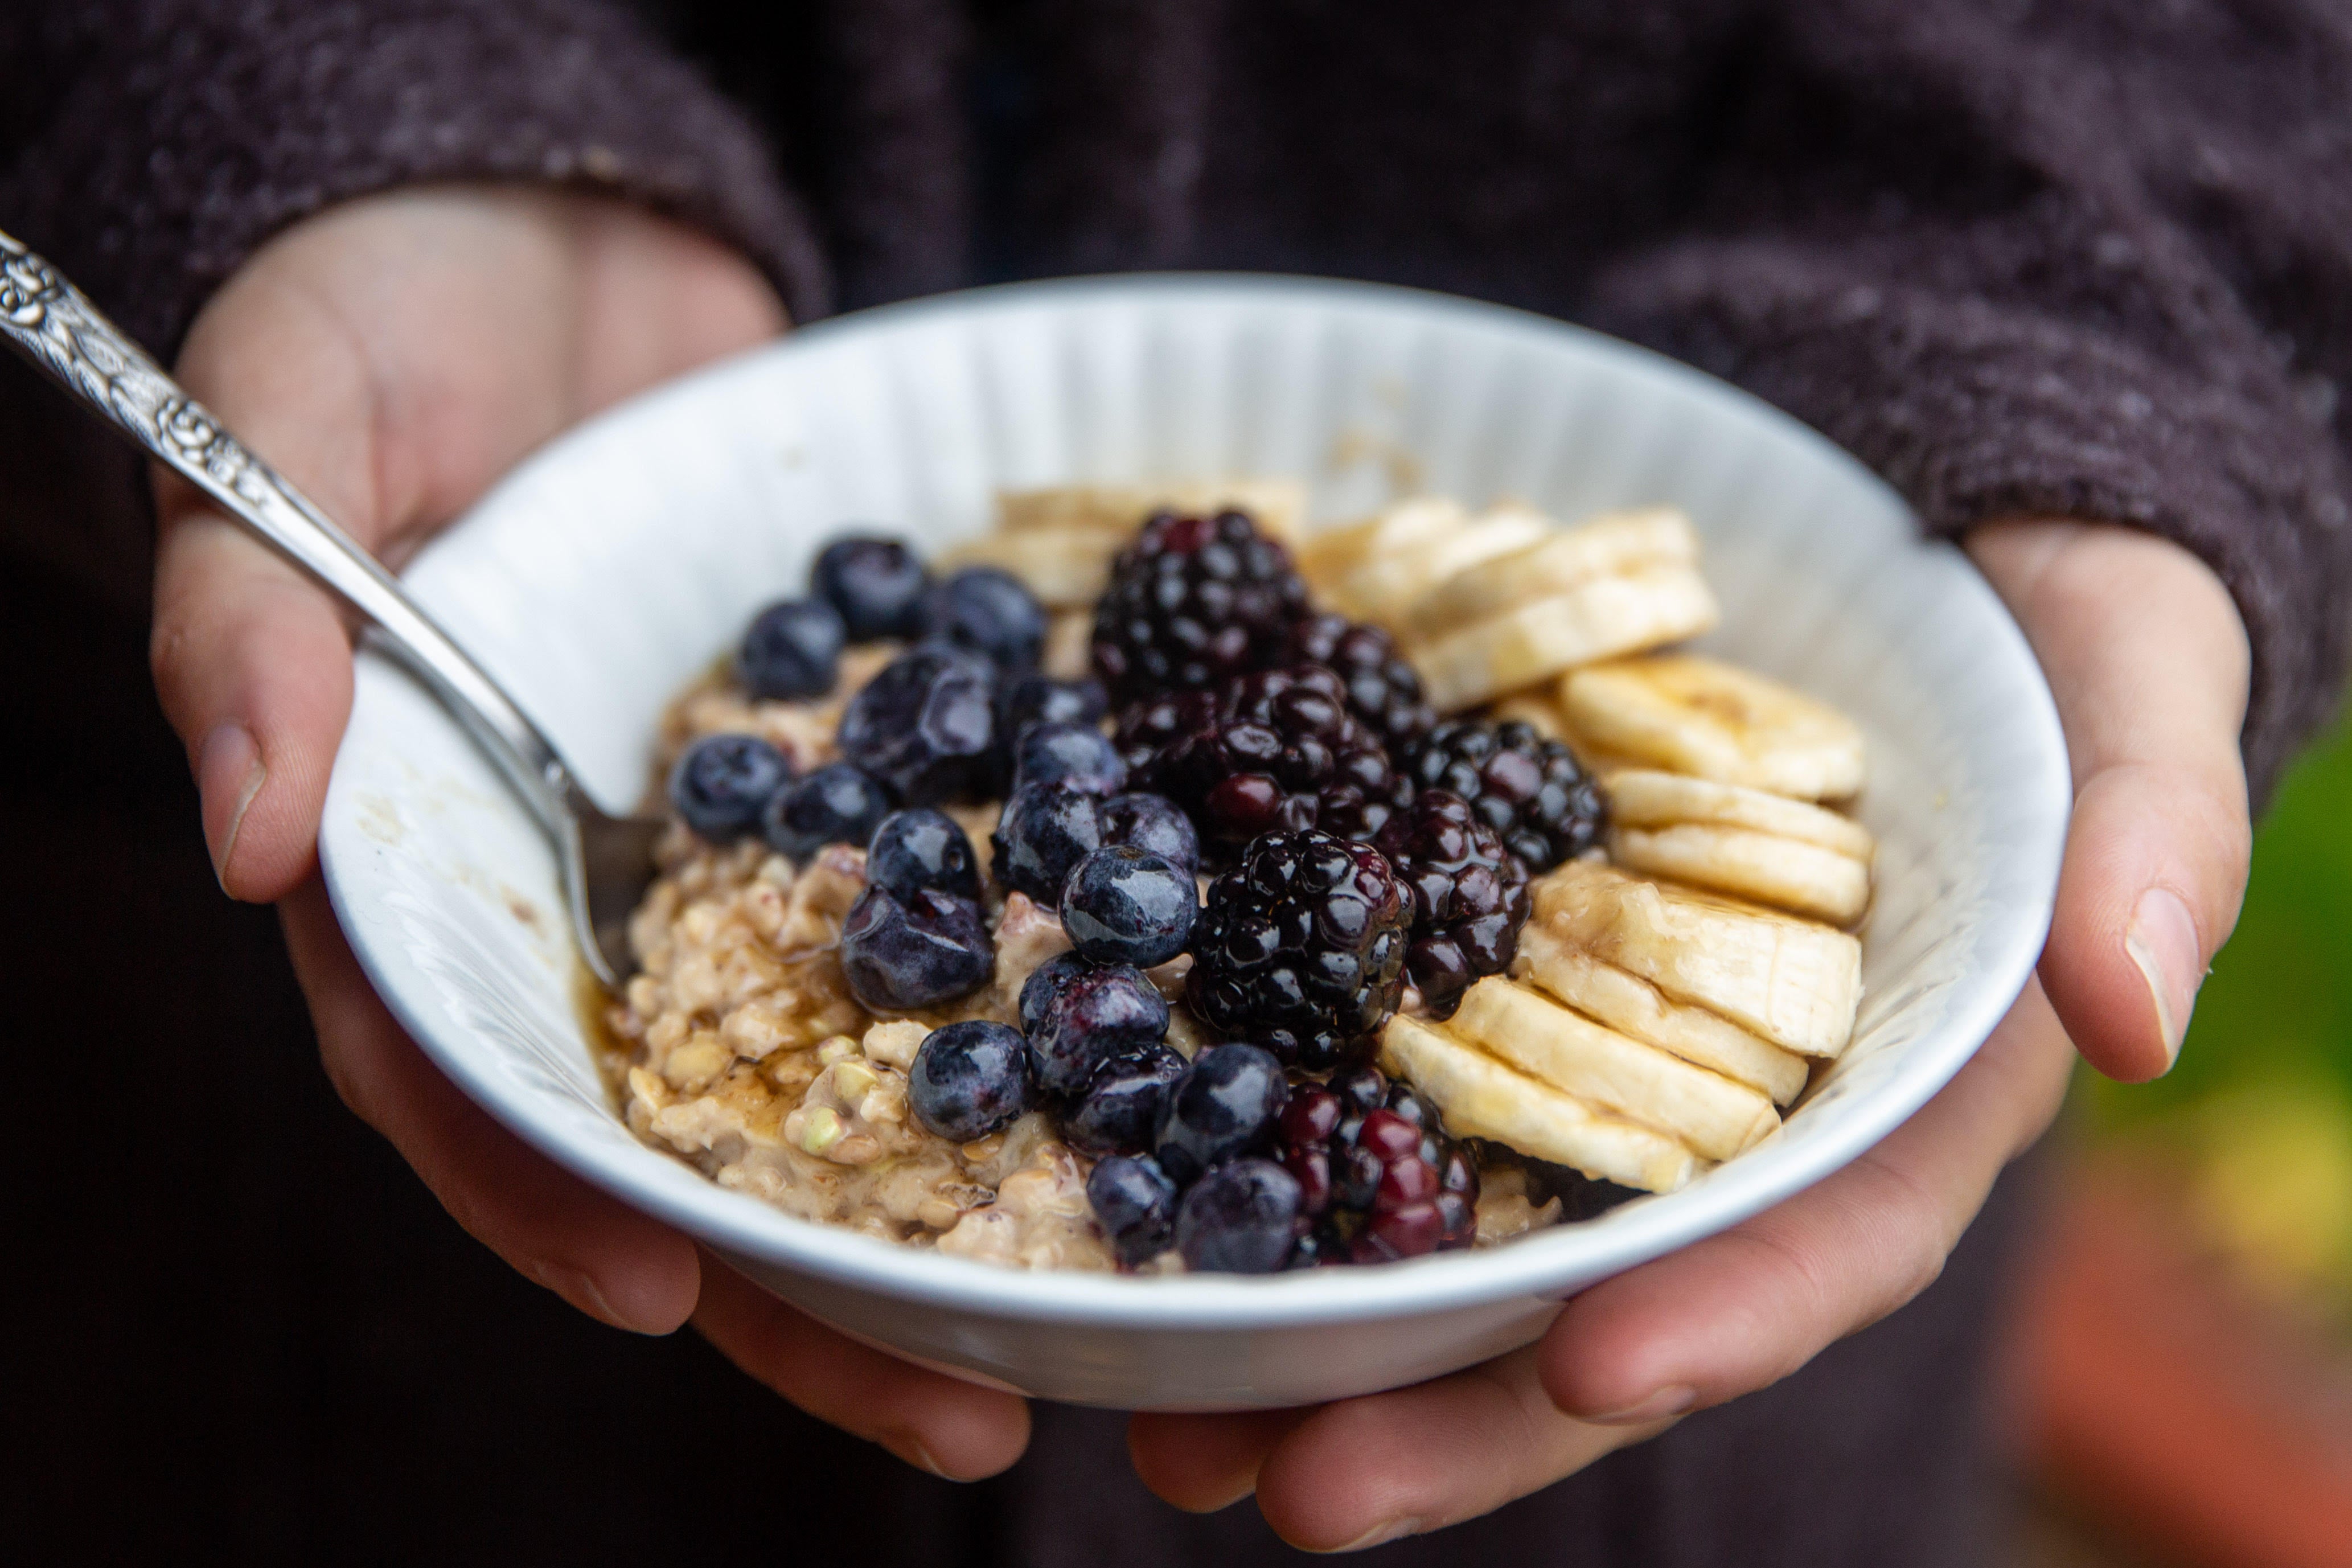 6 Tips from a Dietitian for Choosing a Healthier Breakfast